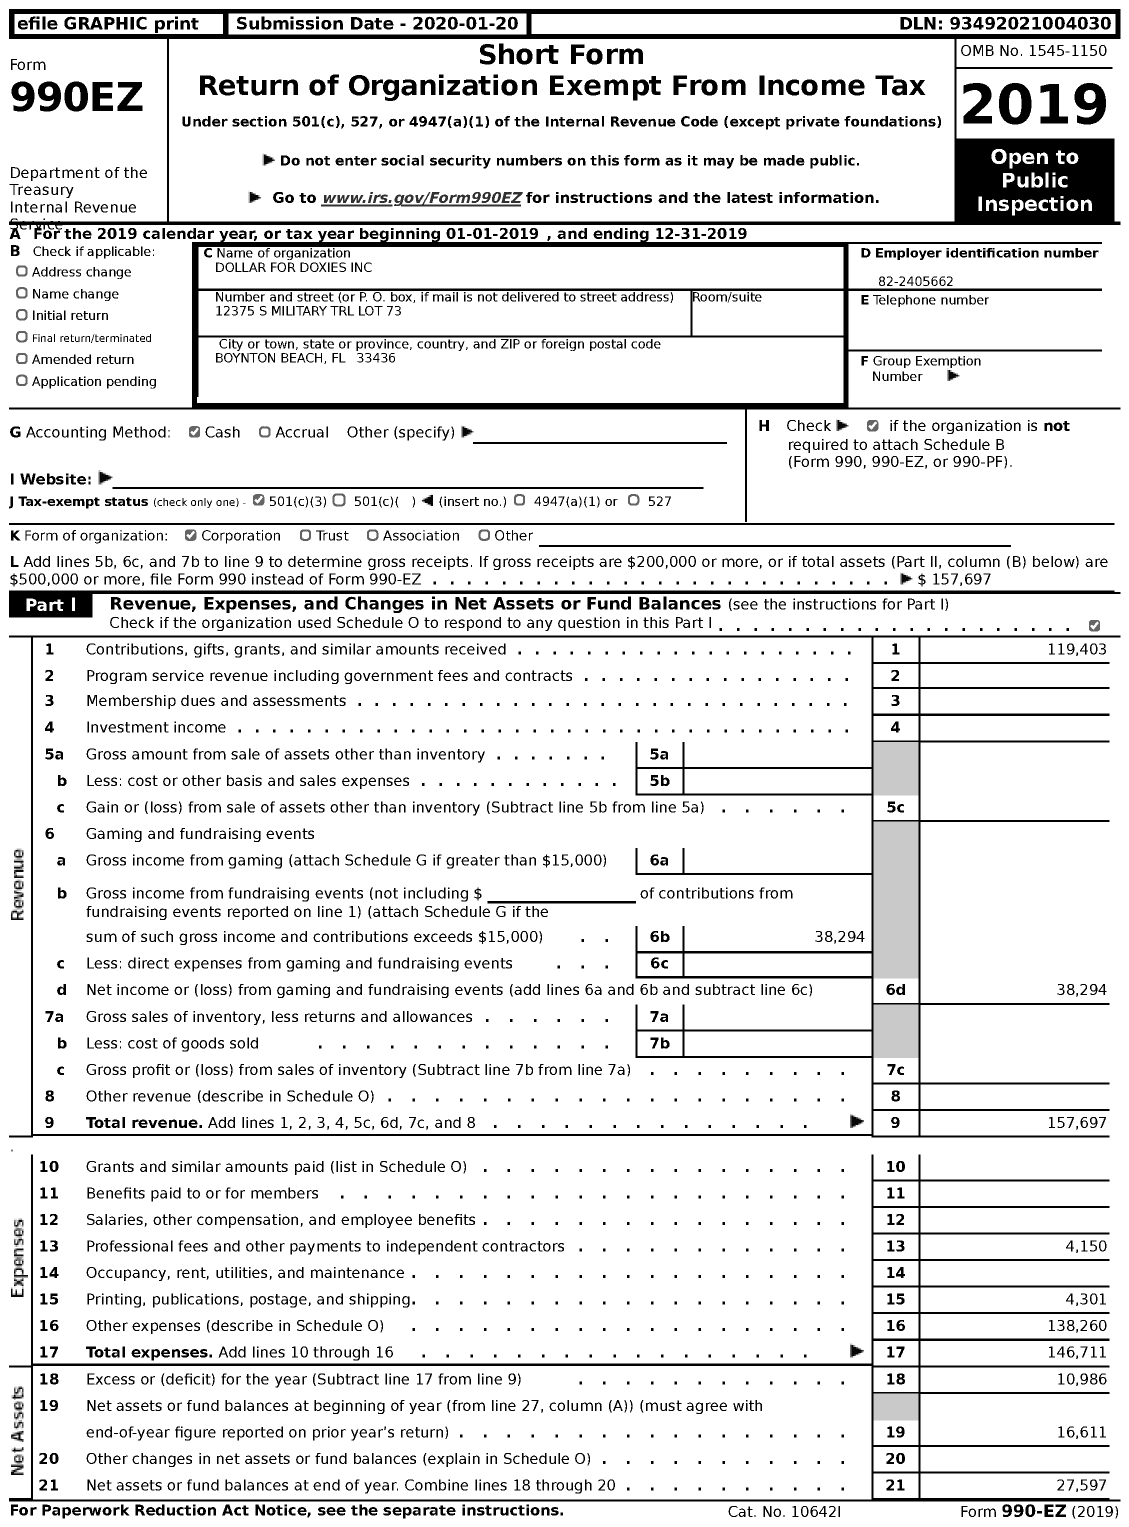 Image of first page of 2019 Form 990EZ for Dollar for Doxies